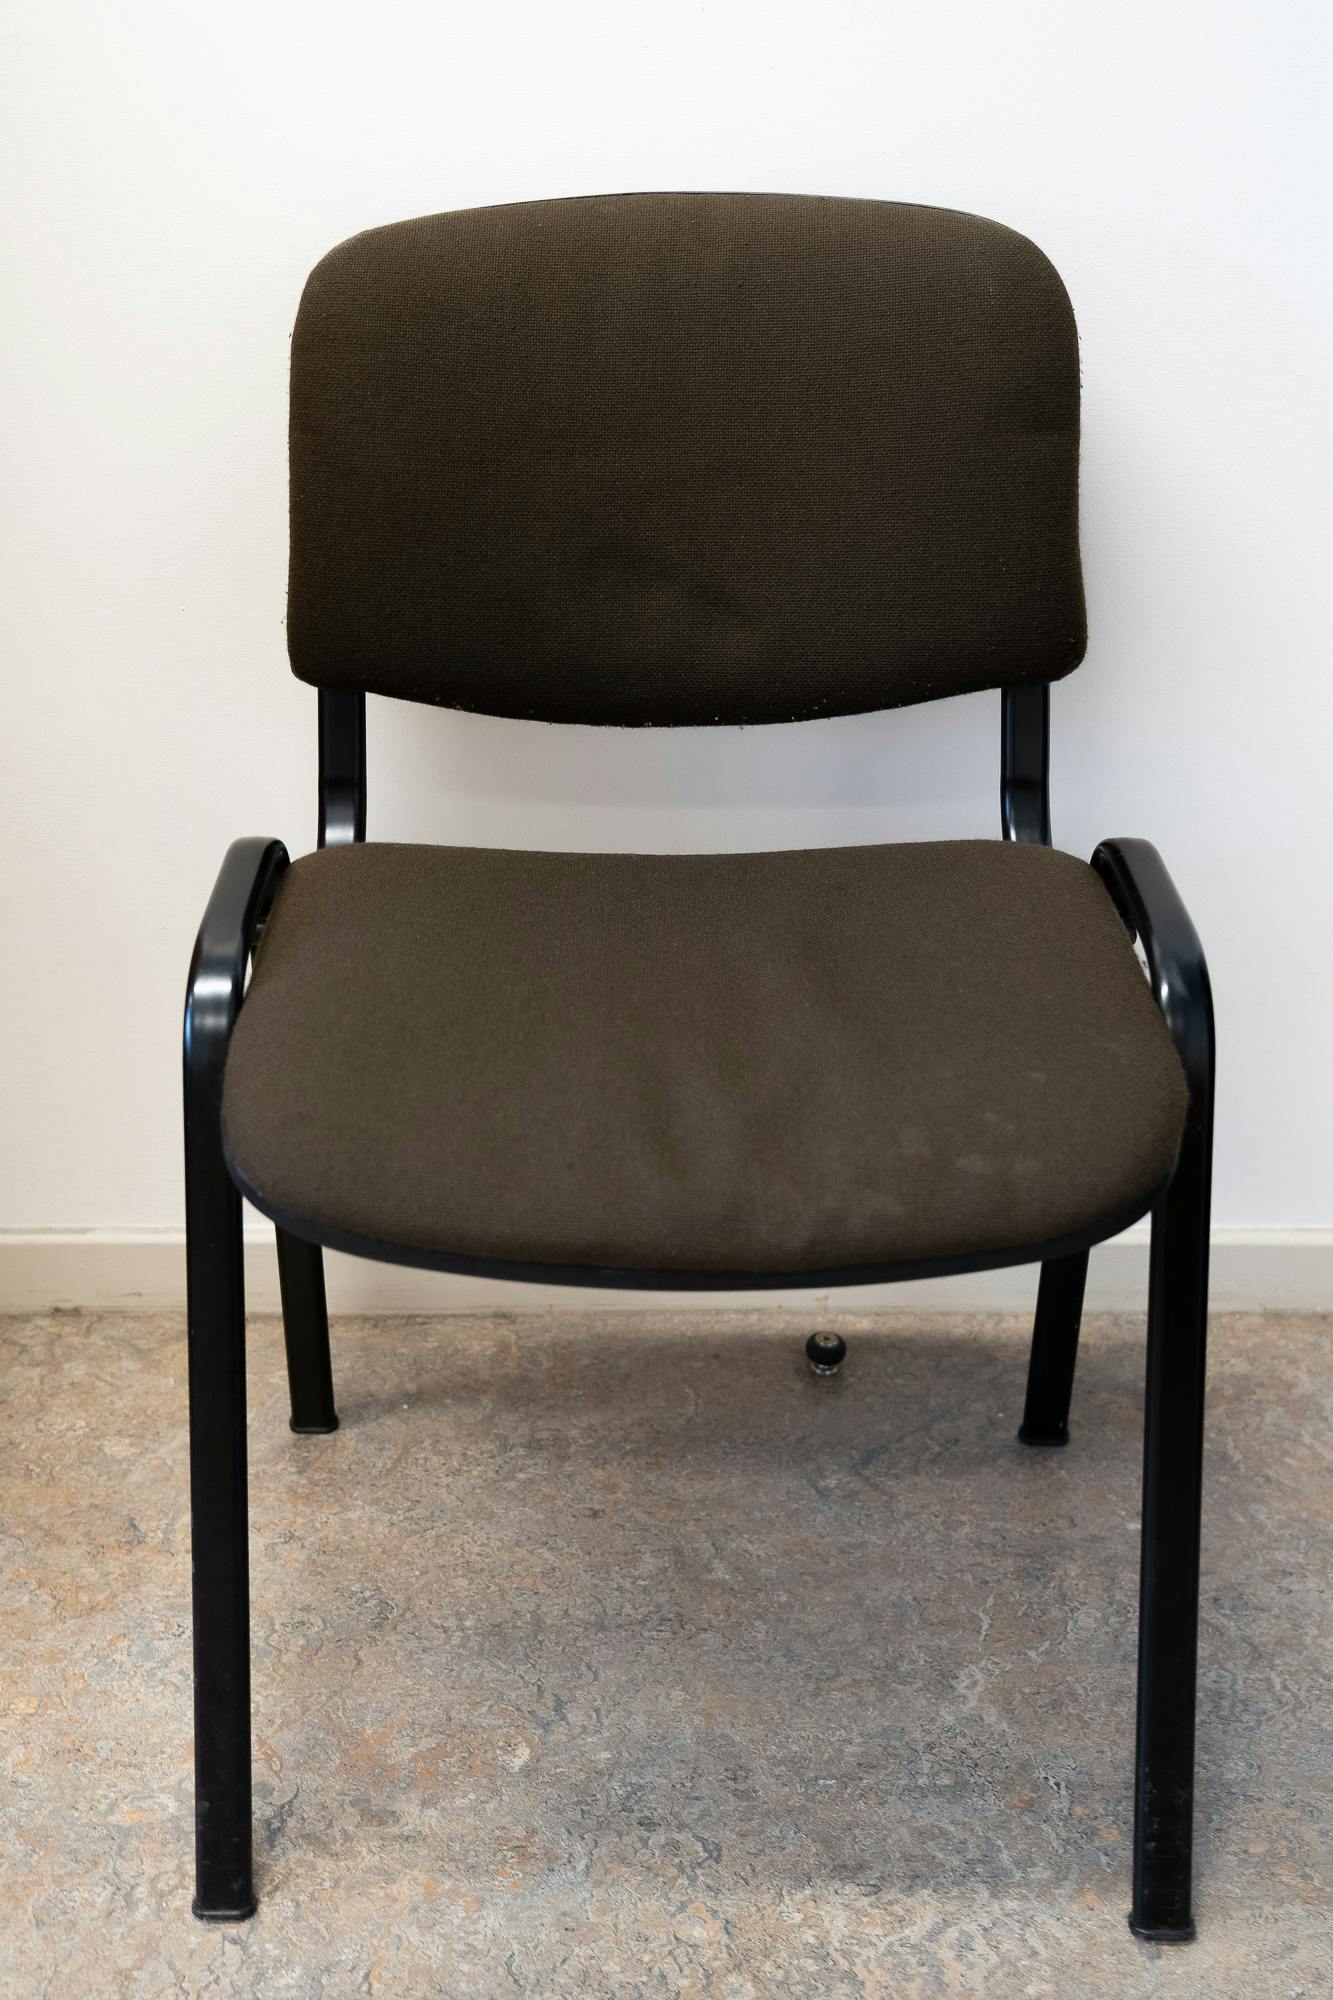 brown stacking chair - Second hand quality "Chairs" - Relieve Furniture